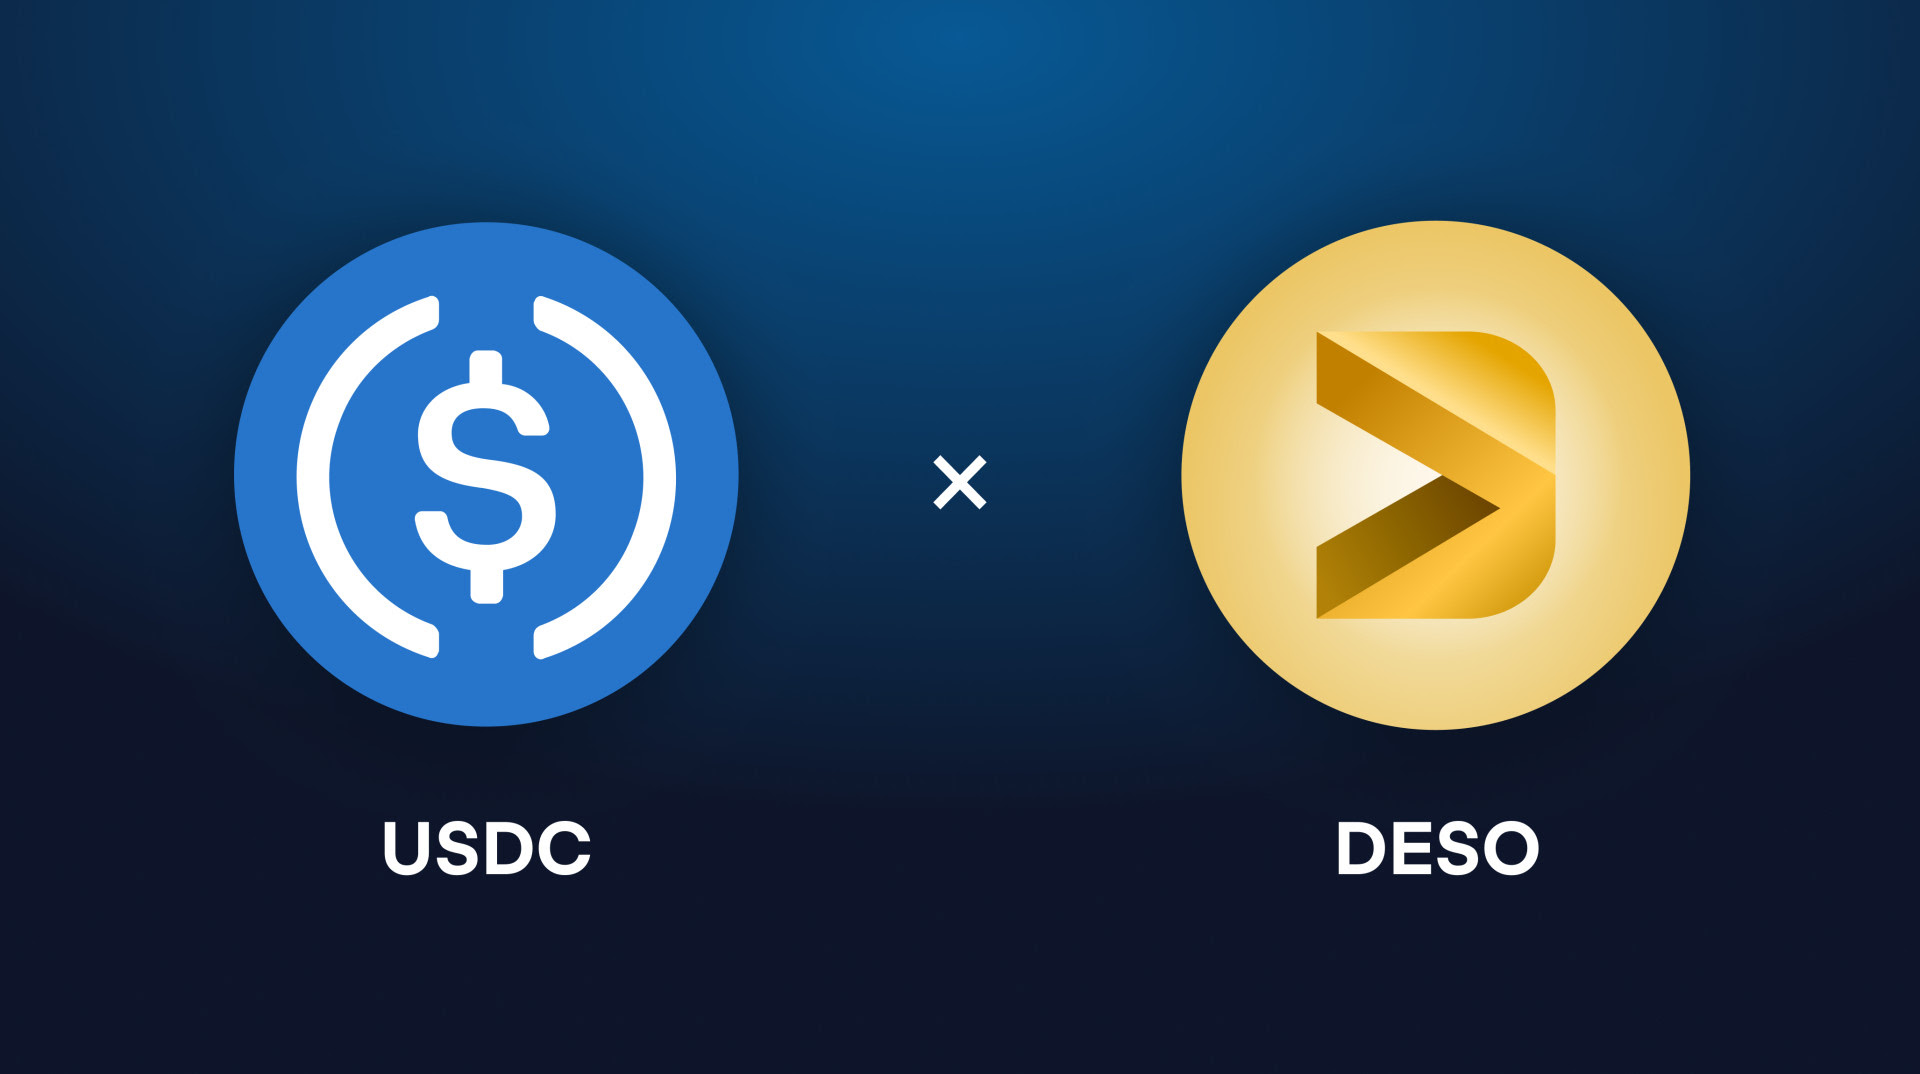 USDC Will Integrate With DeSo Blockchain to Bring Web3 to The Masses